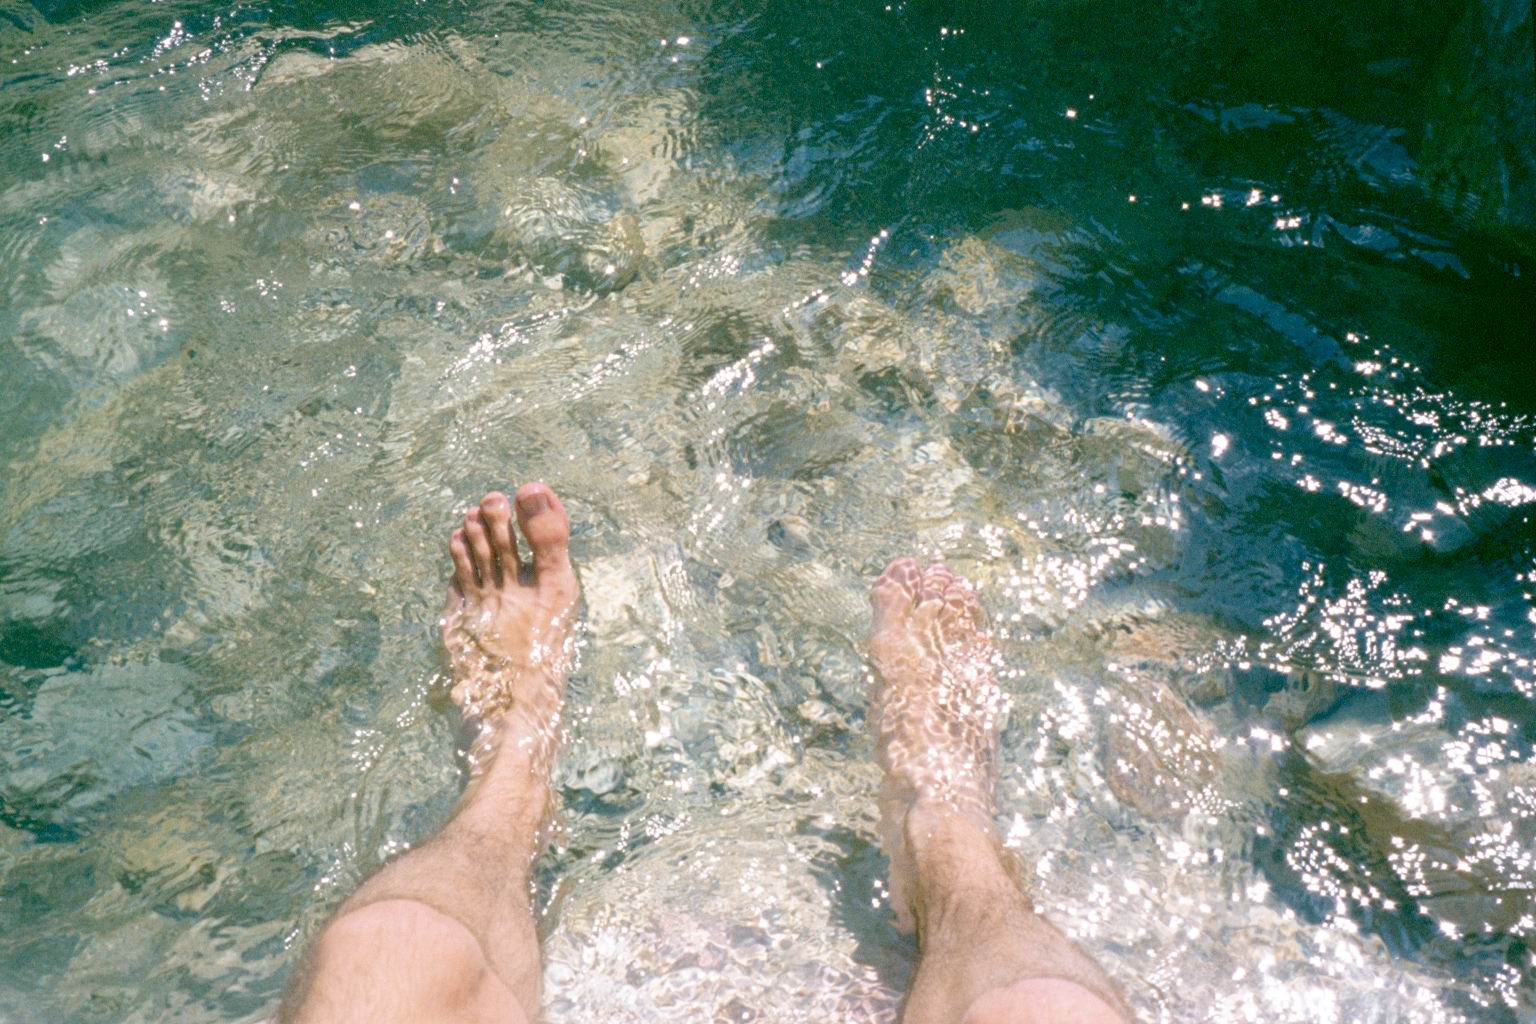 My feets in the rather cold mountain stream near Castle Neuschwanstein